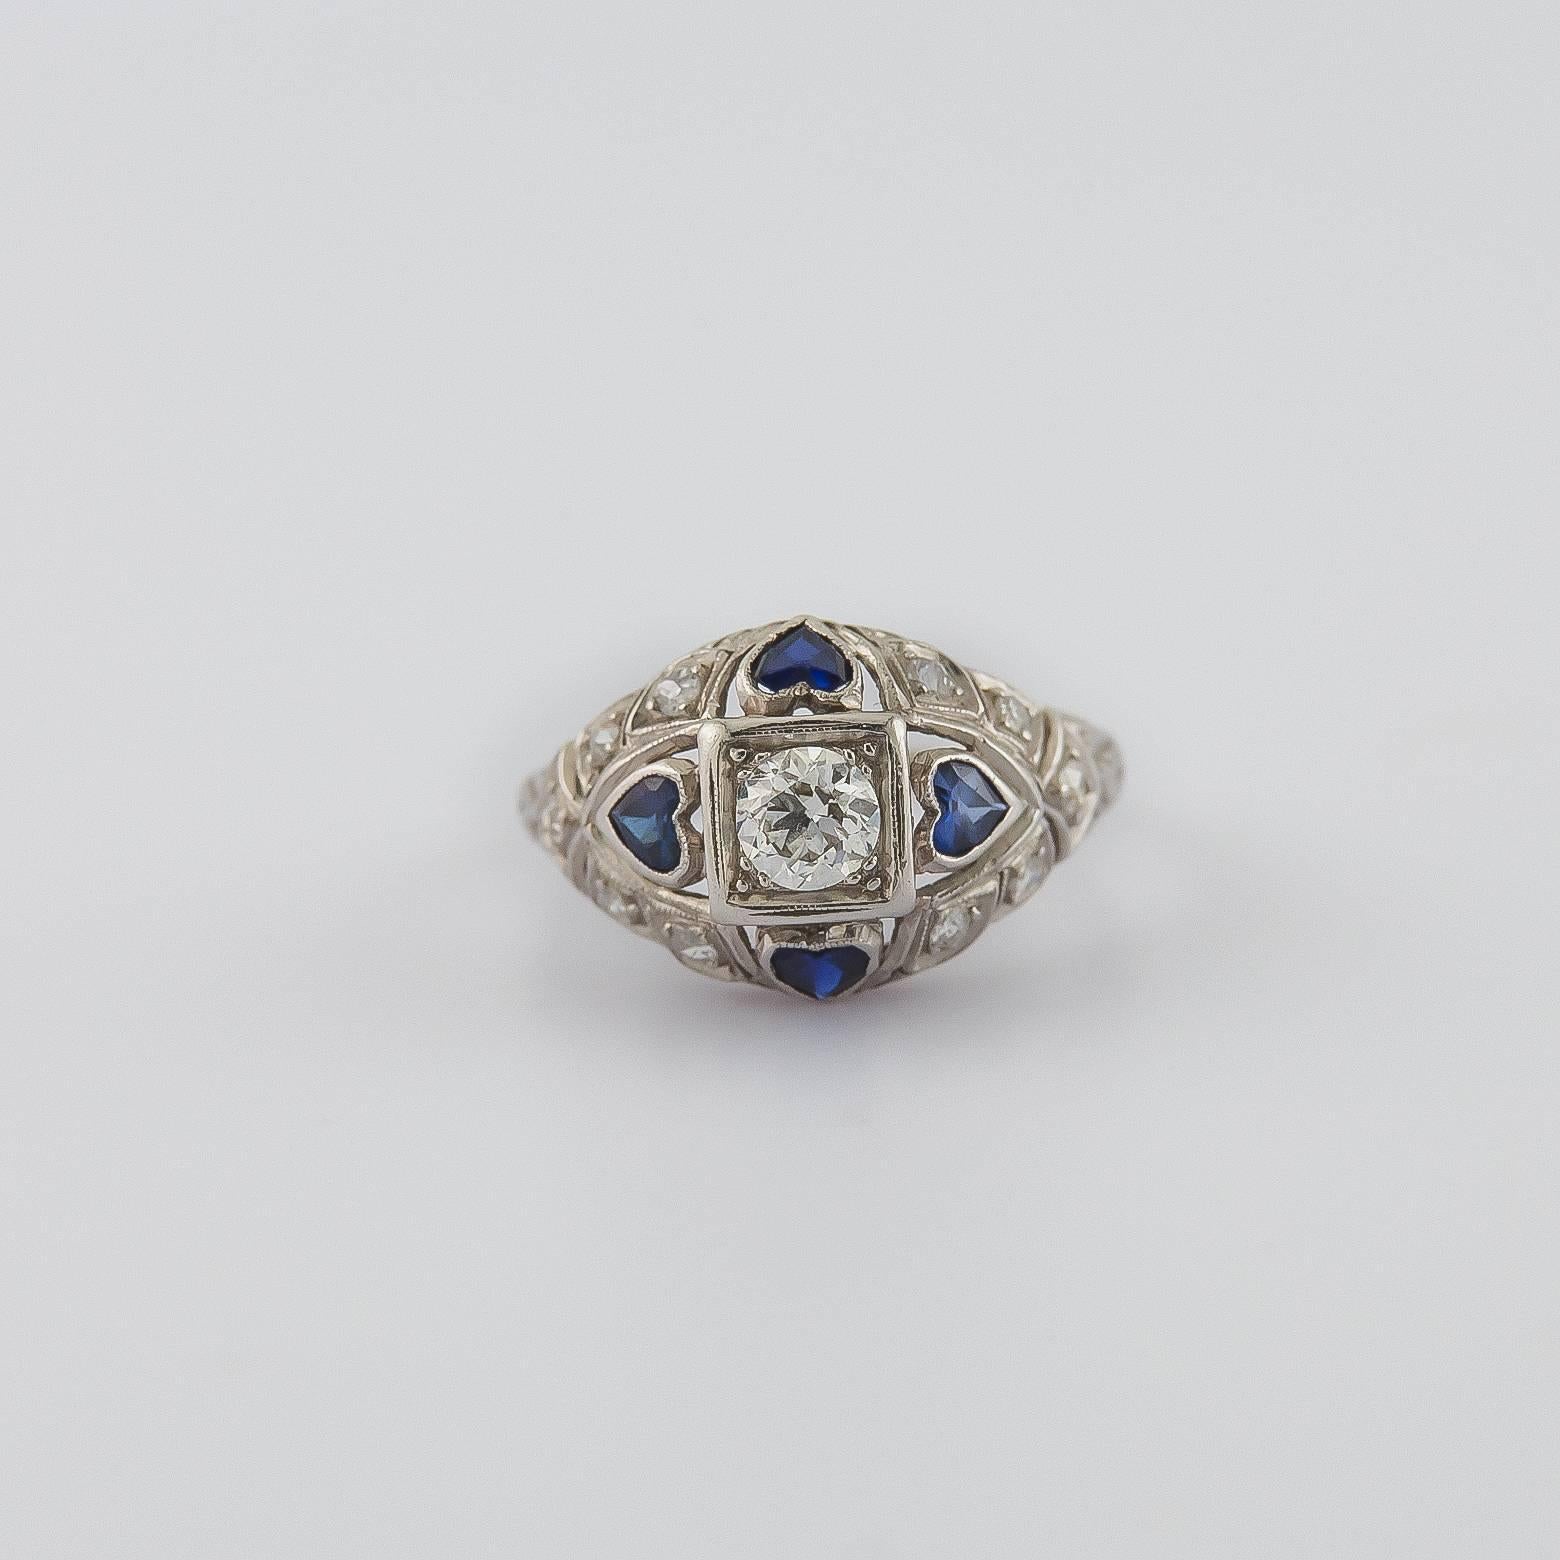 This antique and vintage style heart sapphire and diamond ring is full of beauty and romance! The central diamond is 0.25 carats and the there is a surrounding diamond pave around the deep blue sapphires set in platinum! Size 5.75